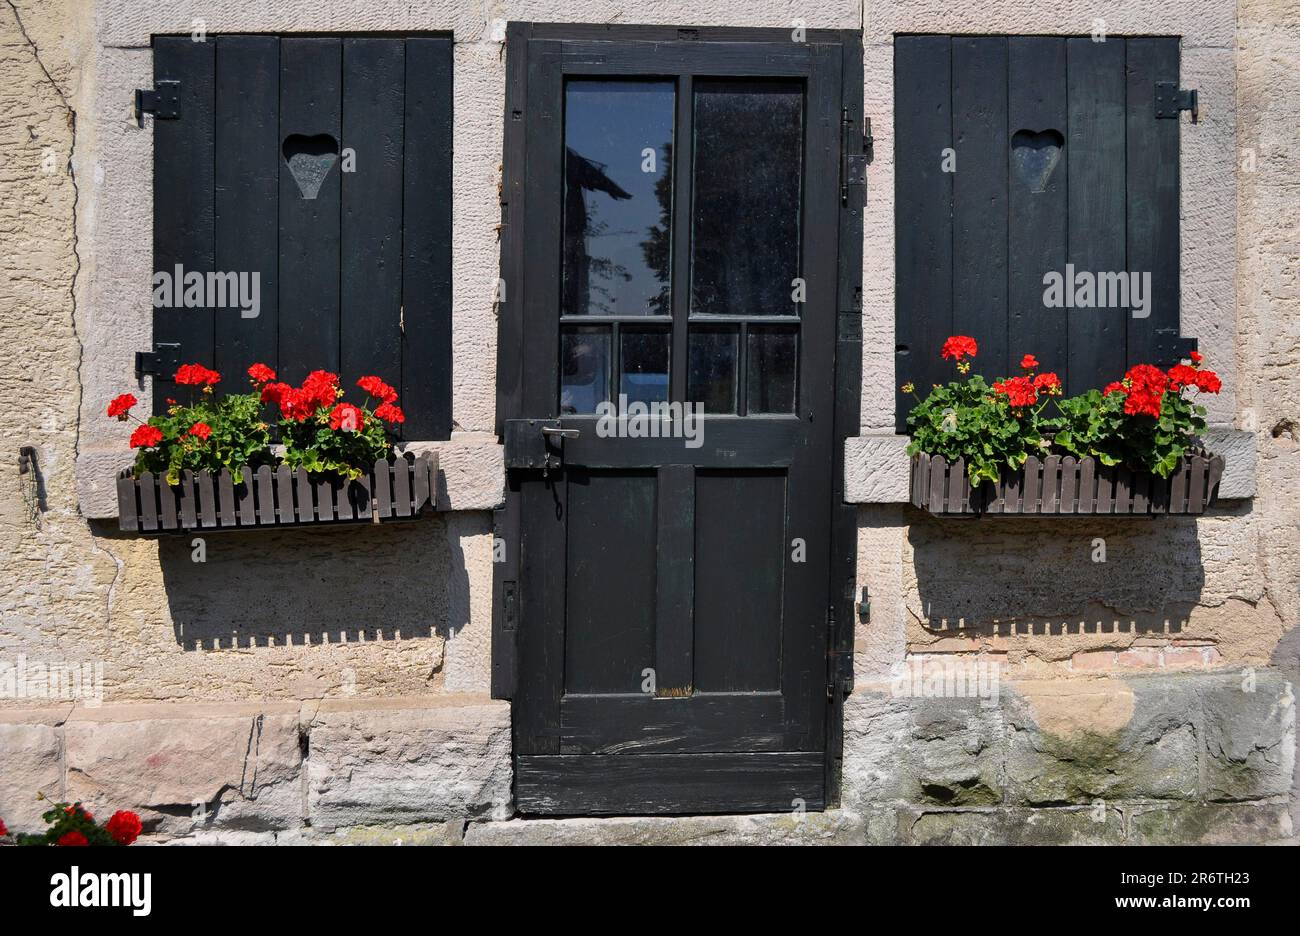 Wooden door with wooden shutters, flowers on the window outside, red geraniums in the box, Pelargonium Stock Photo